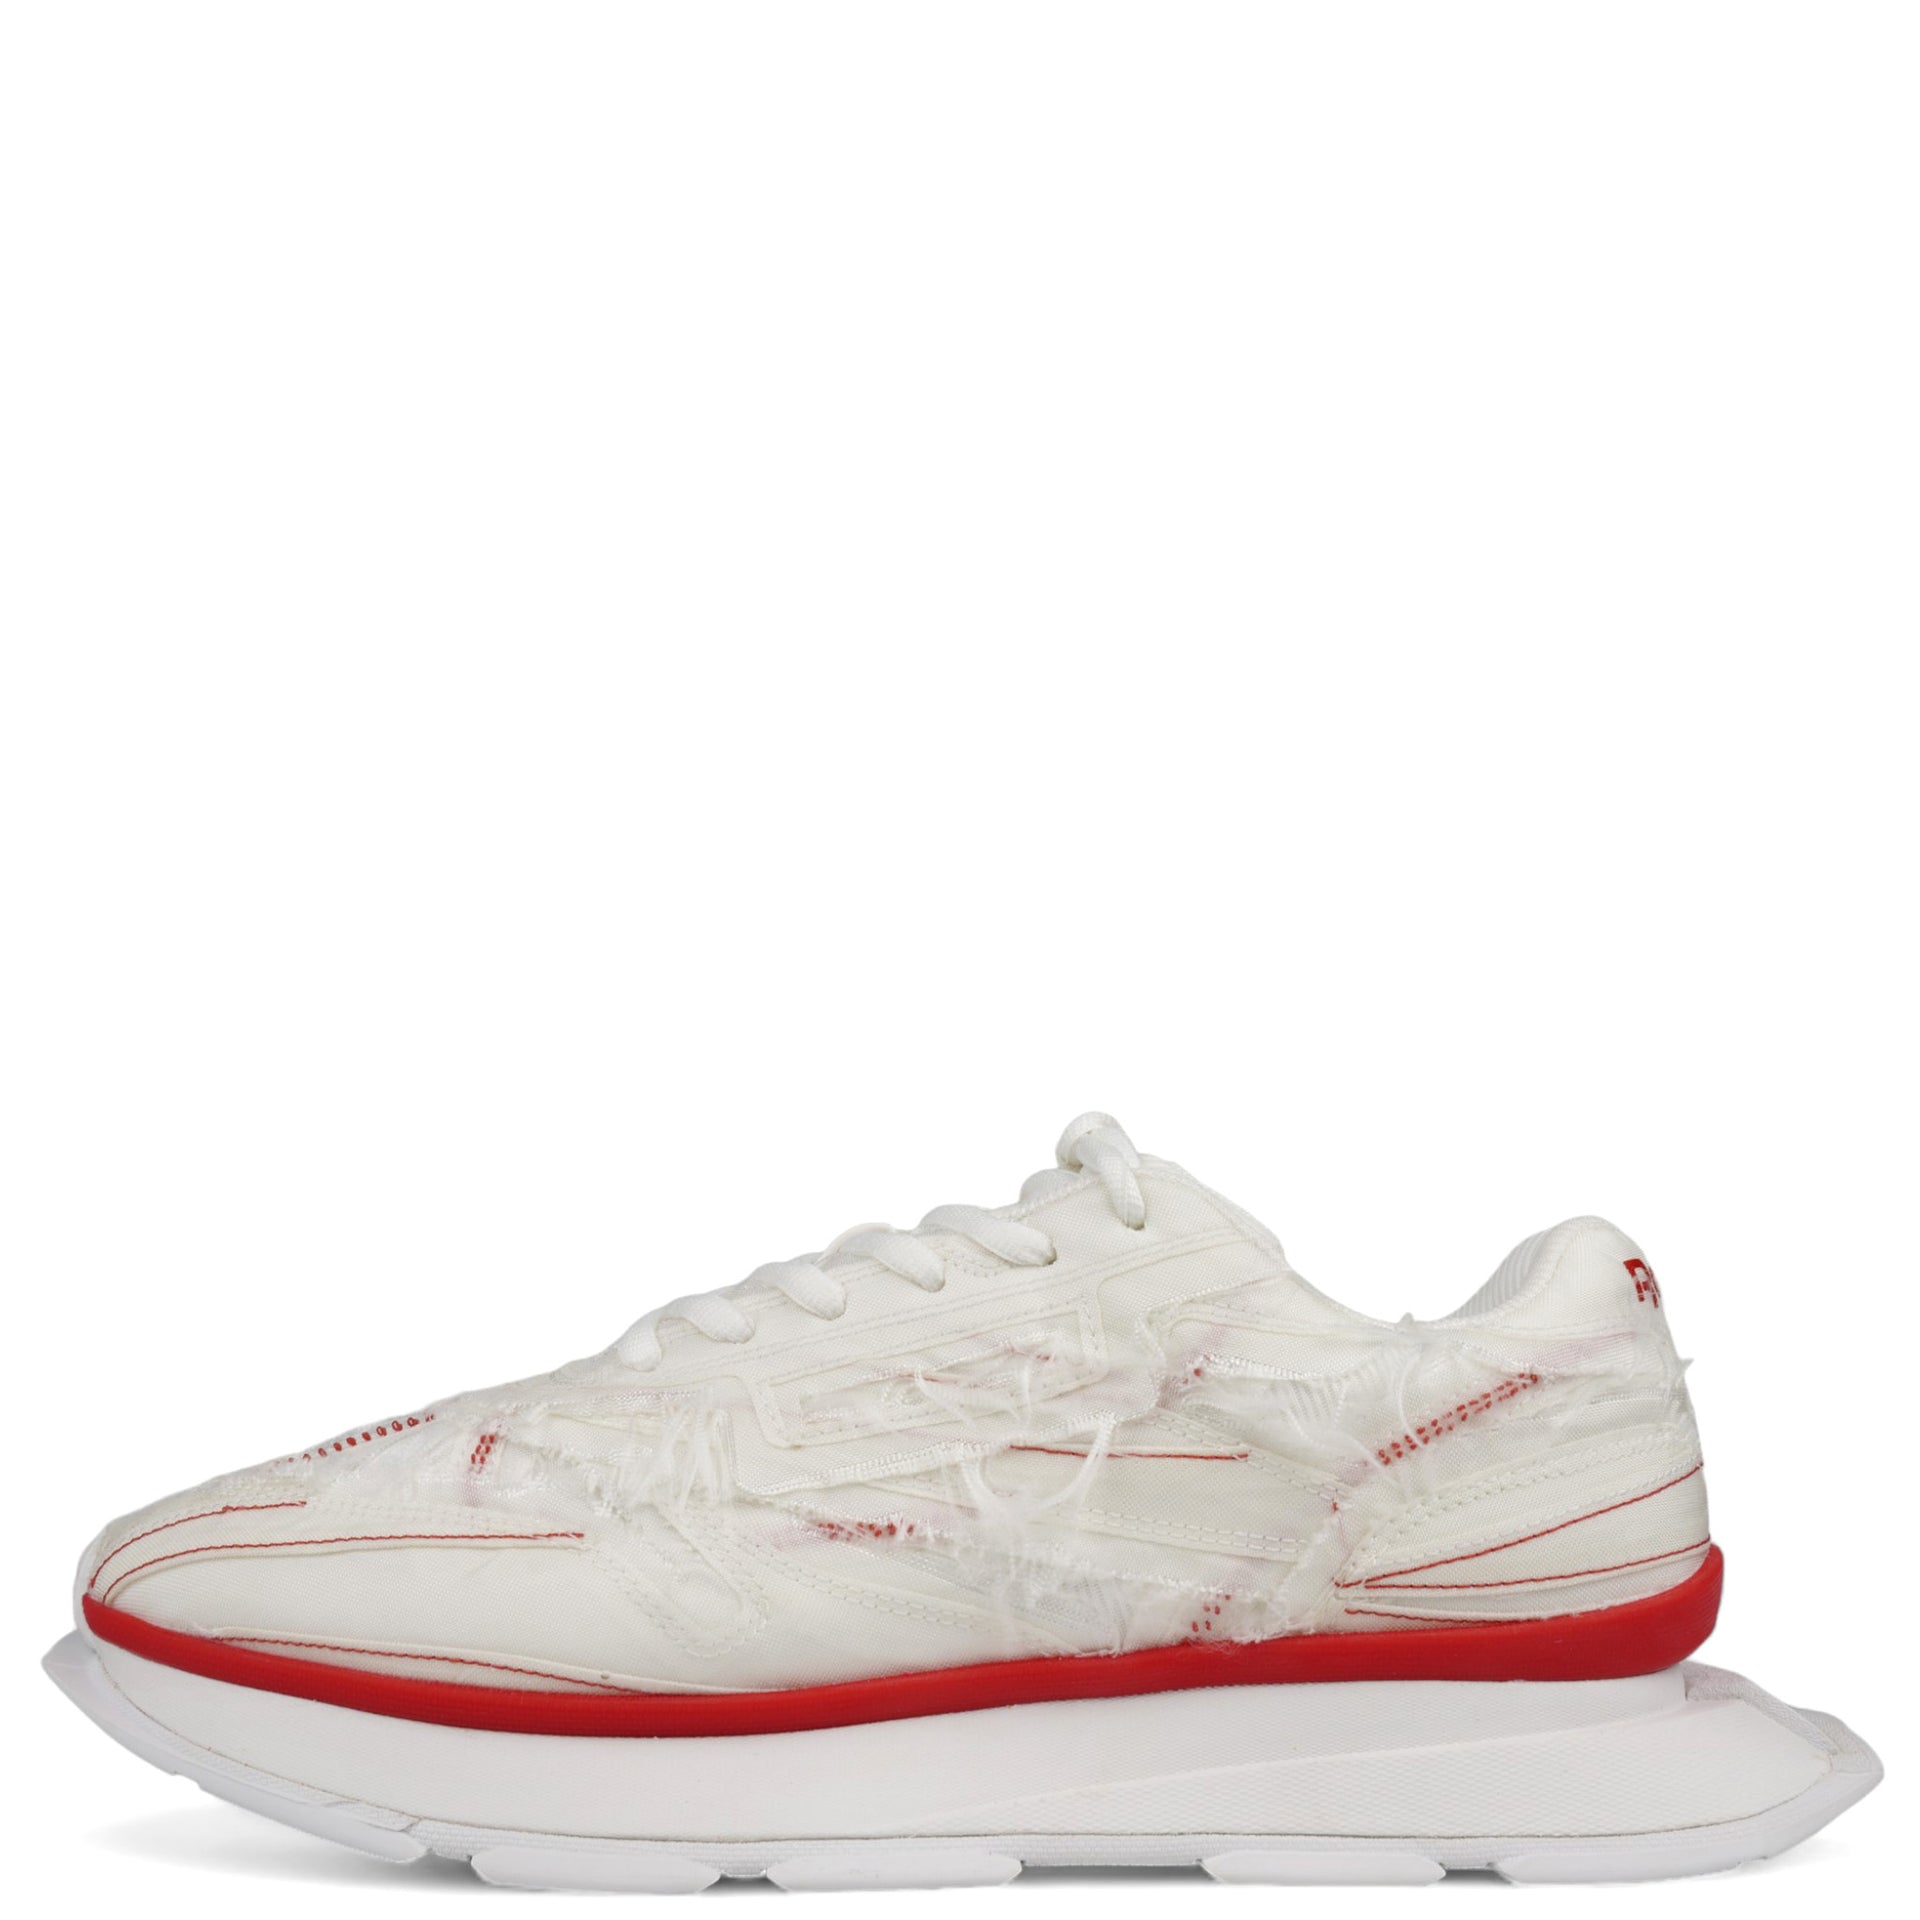 CLASSIC LEATHER LTD / WHITE/RED